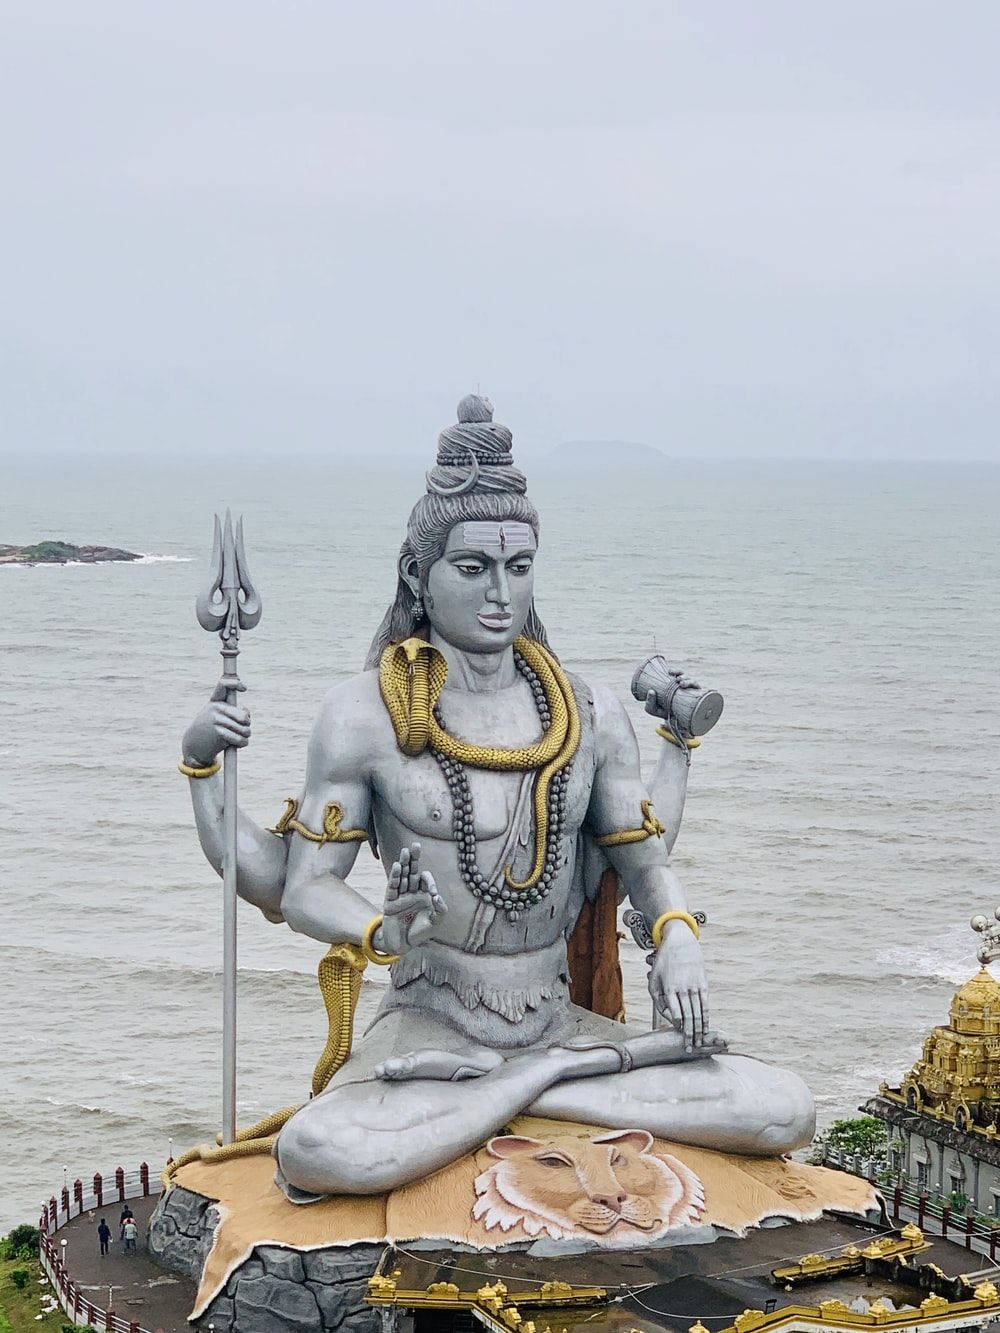 Lord Shiva Picture. Download Free Image